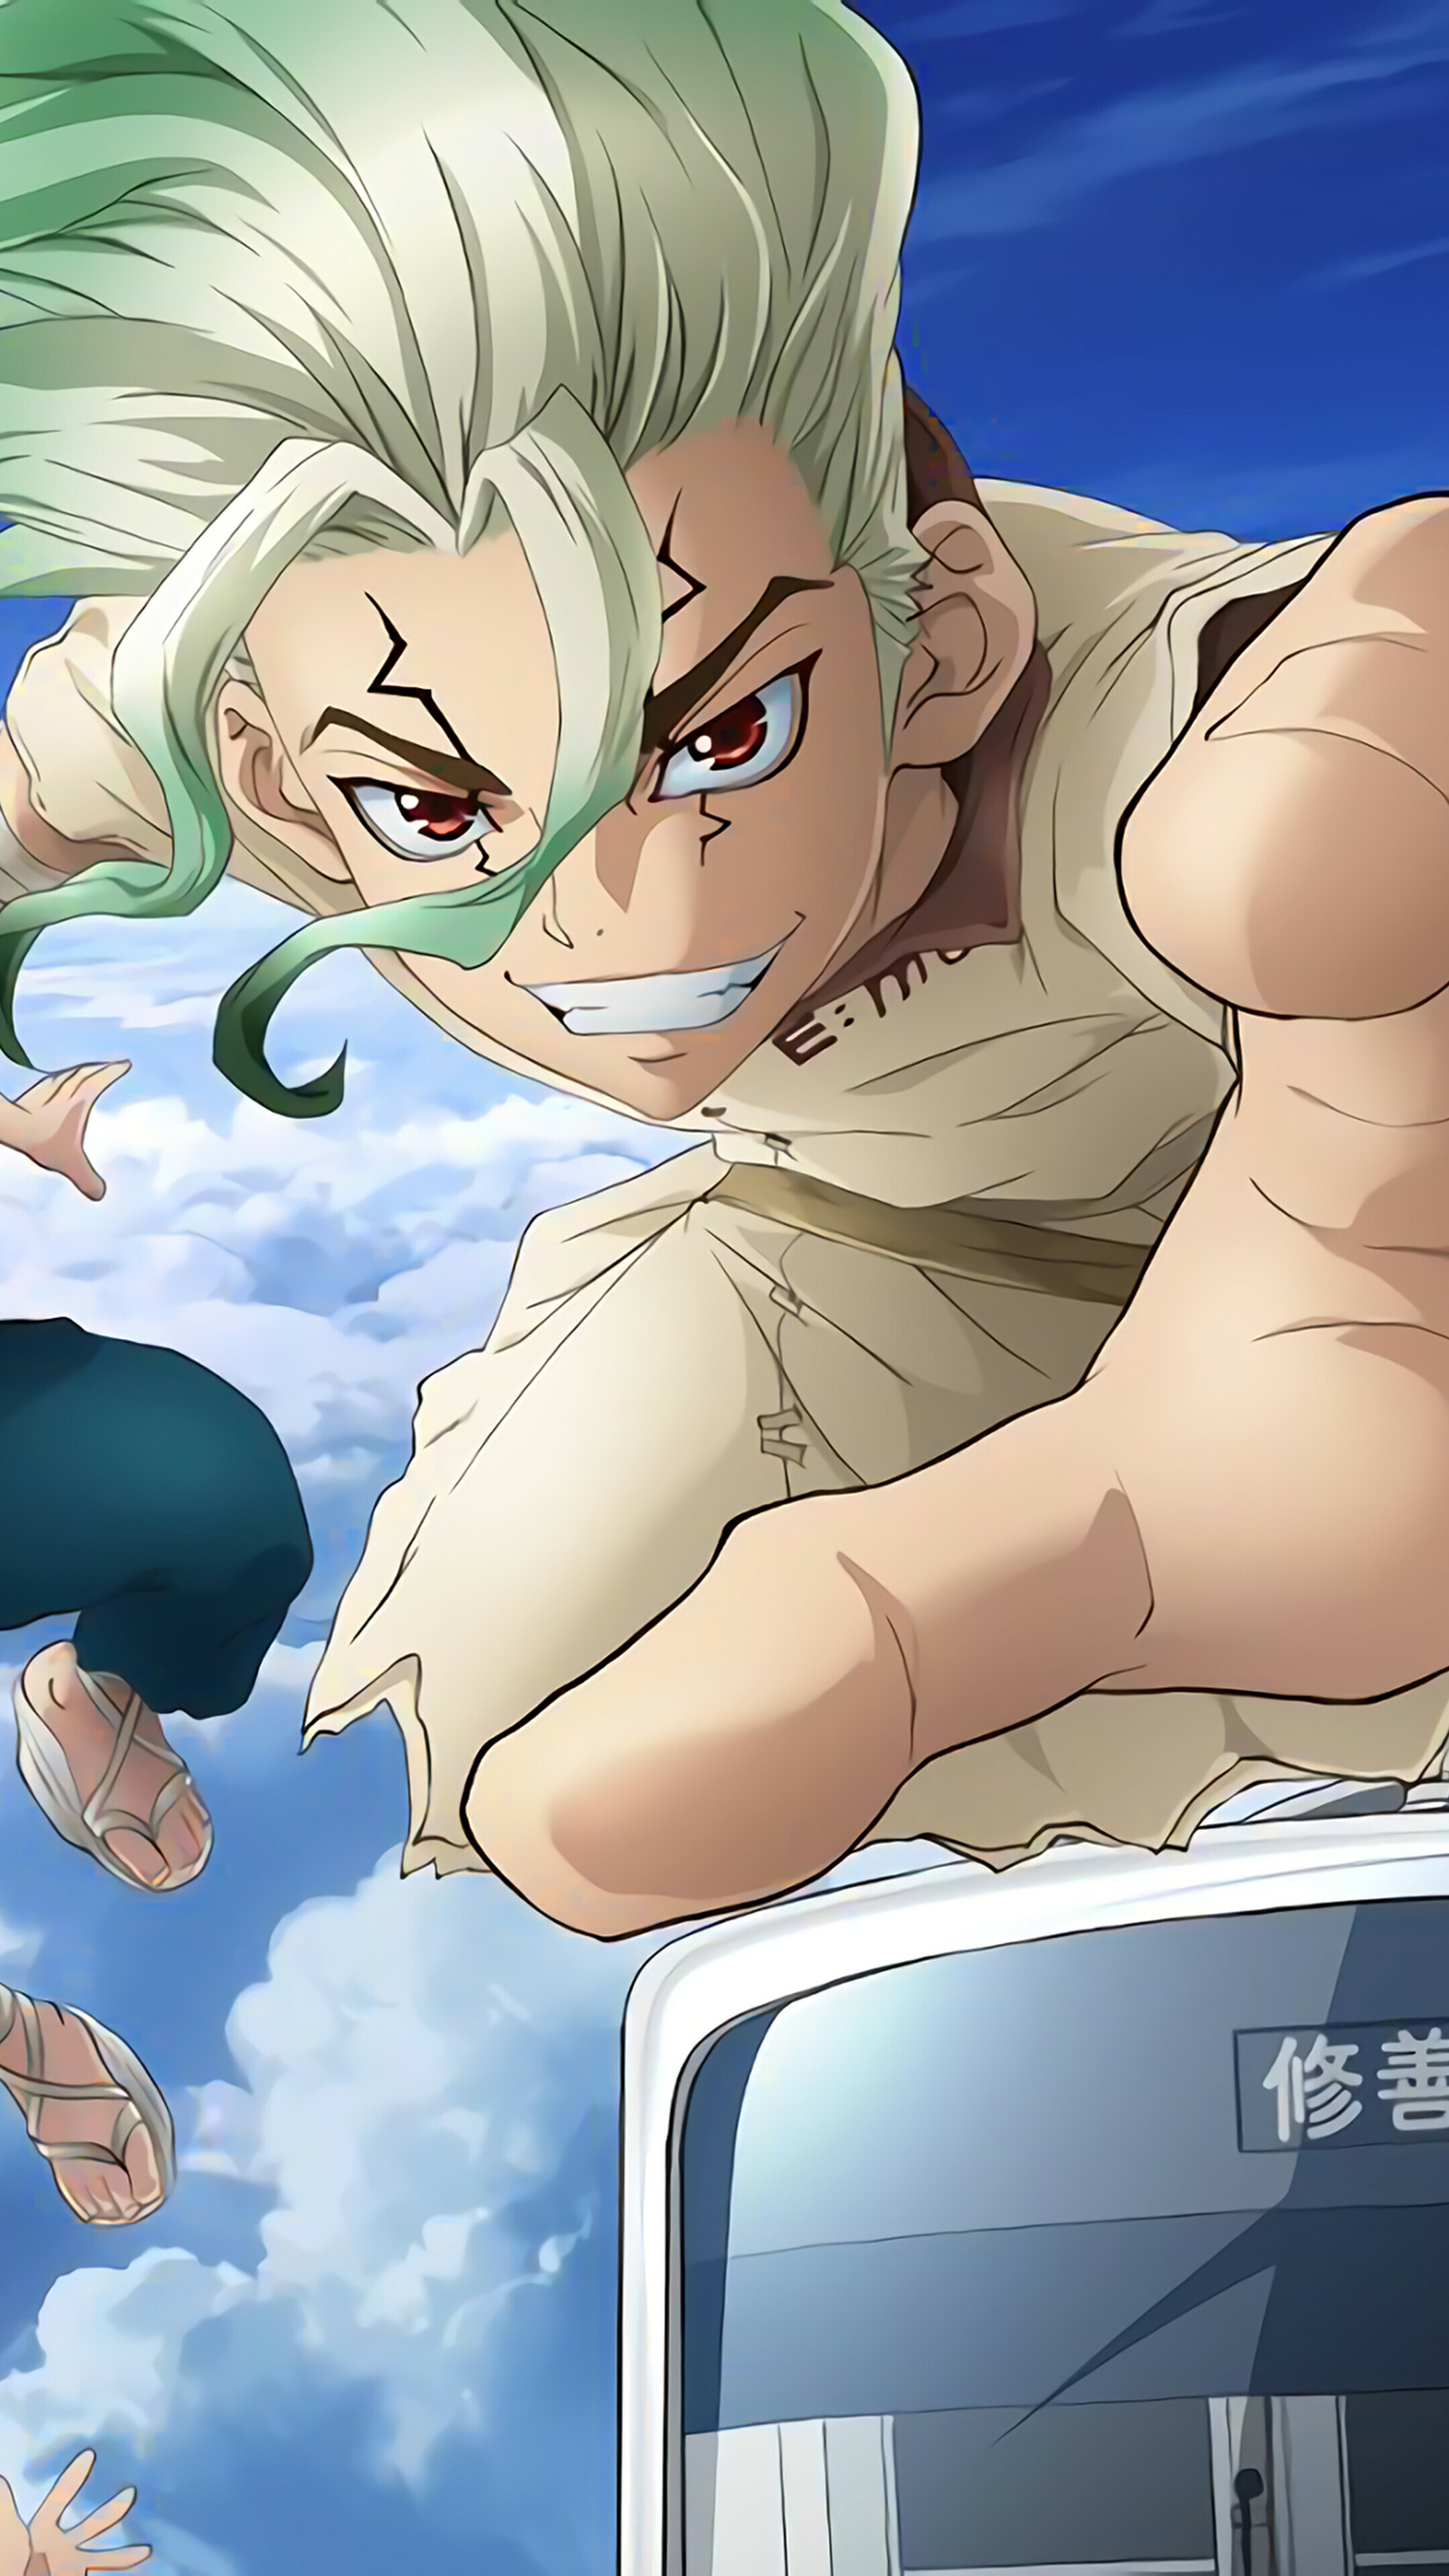 Dr.STONE: A teenage scientific genius who plans to rebuild civilization after humanity was mysteriously petrified for 3,700 years. 2160x3840 4K Wallpaper.